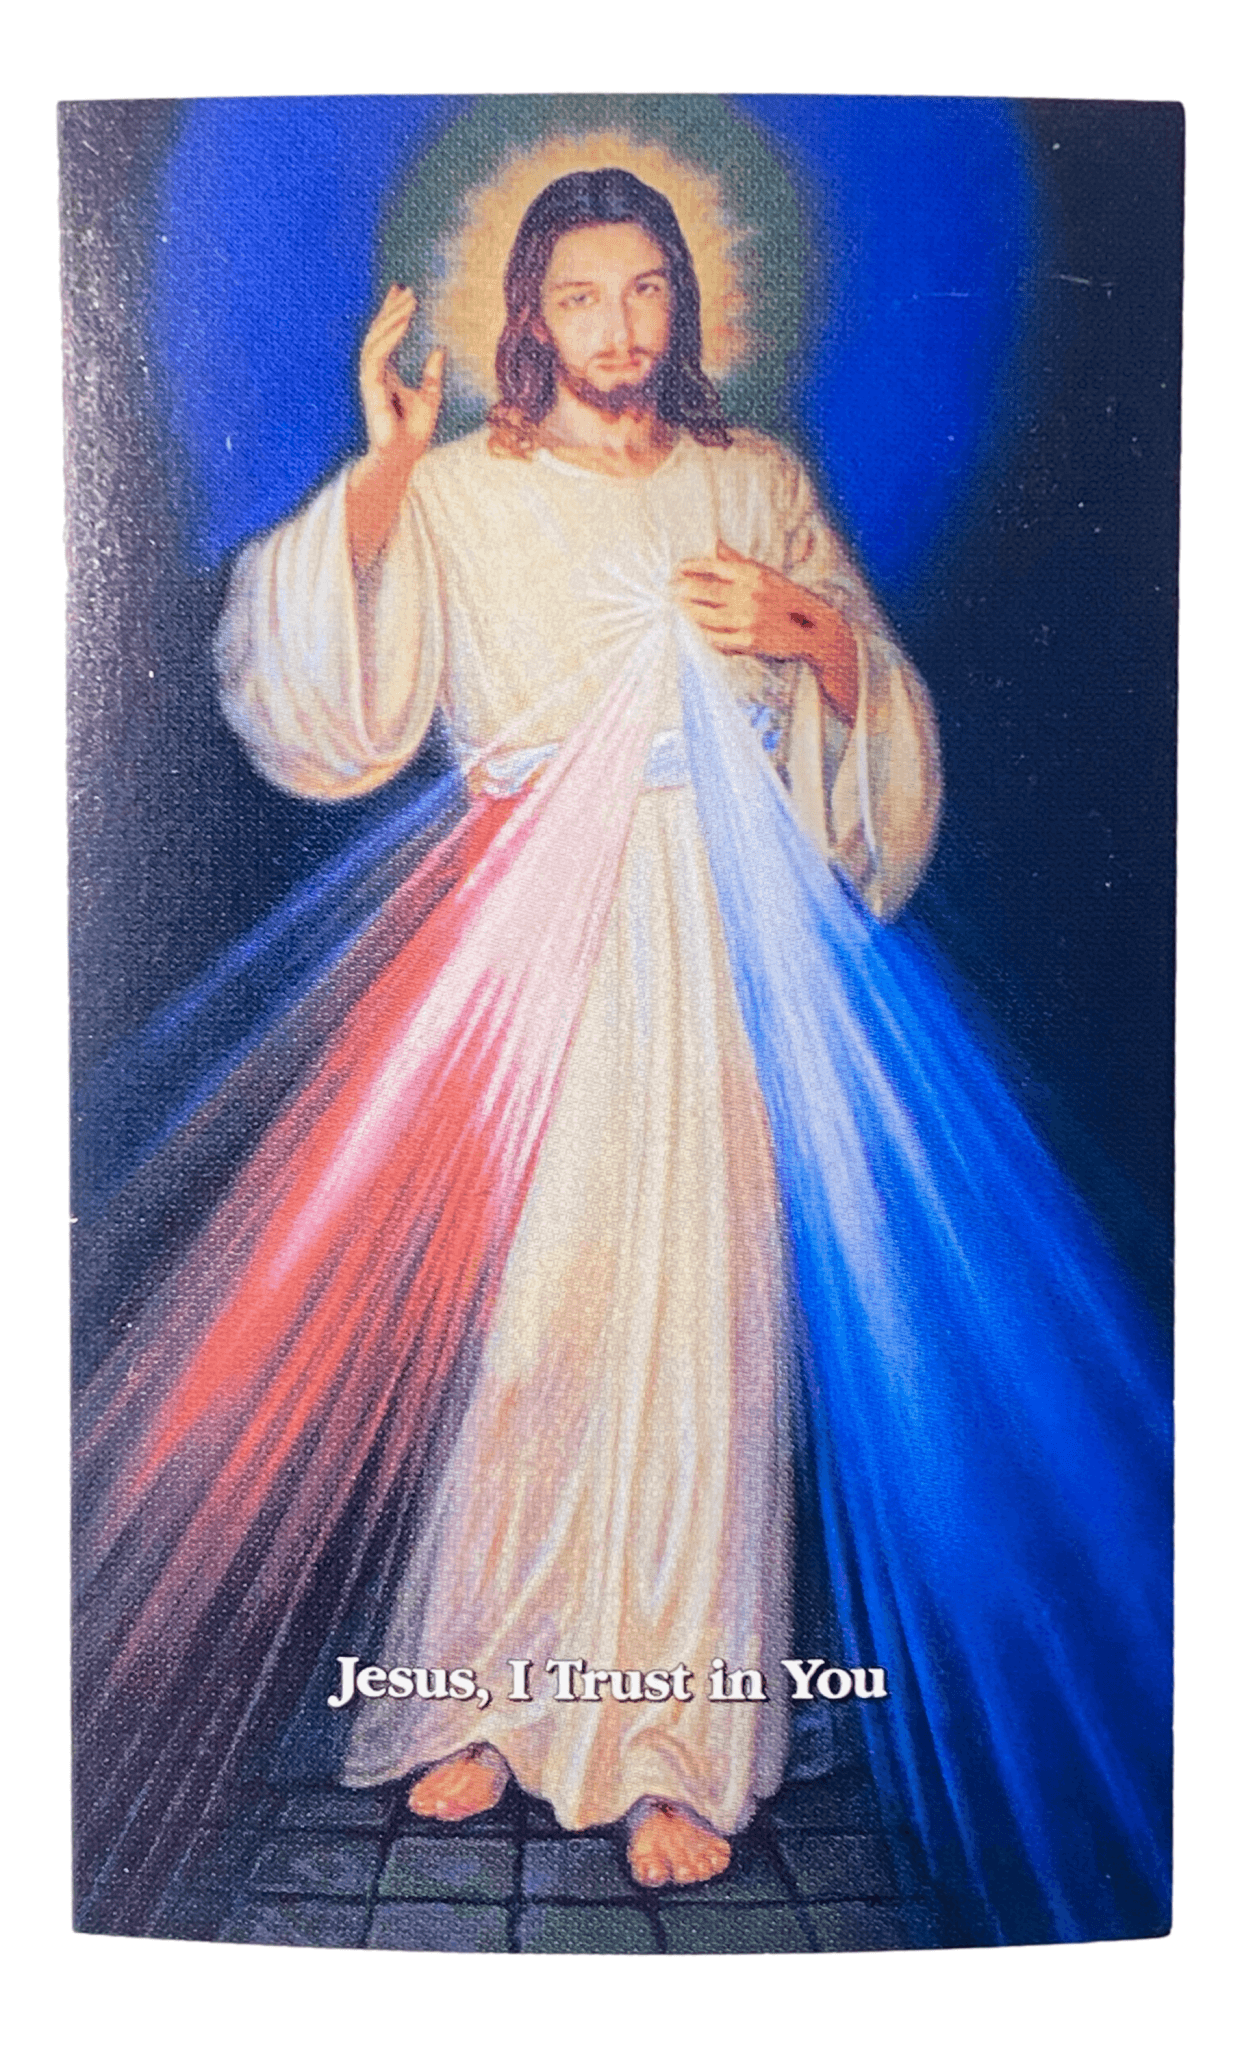 Prayer Card Jesus I Trust In You Chaplet of Divine Mercy HC9-220E 3.5 L x 2.15 W inches - Ysleta Mission Gift Shop- VOTED El Paso's Best Gift Shop